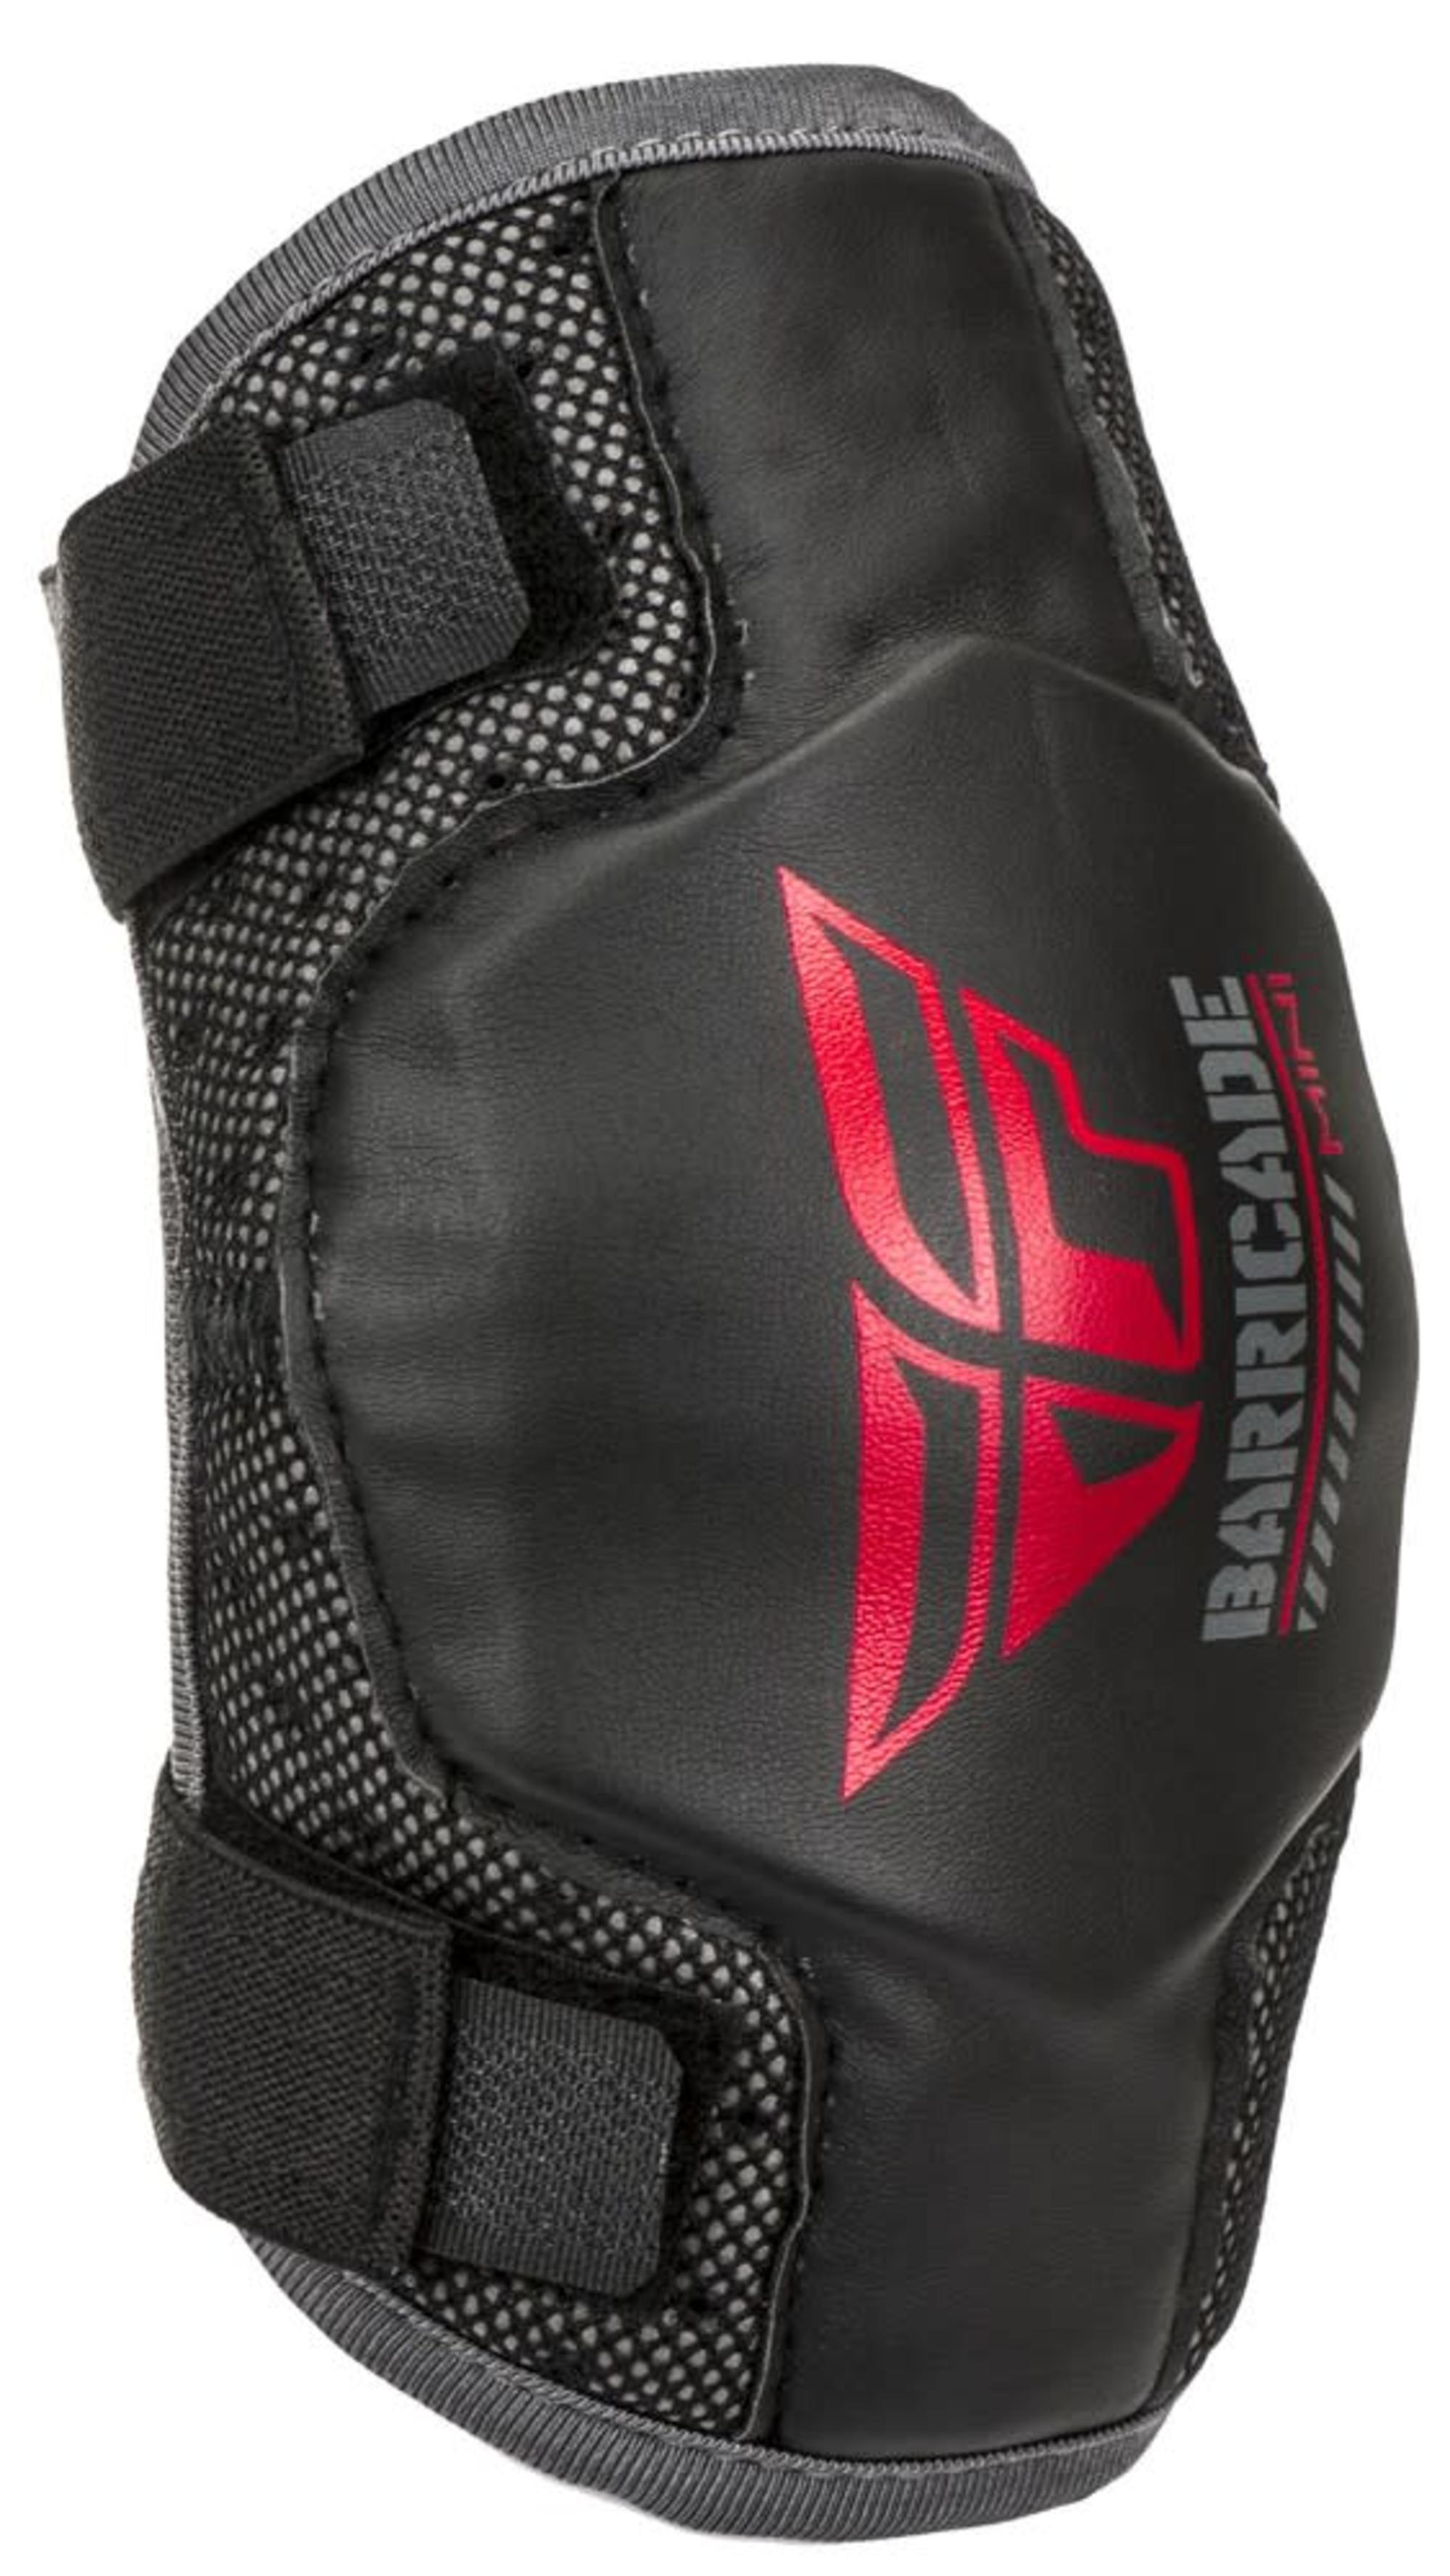 fly racing elbow guards protections for kids barricade